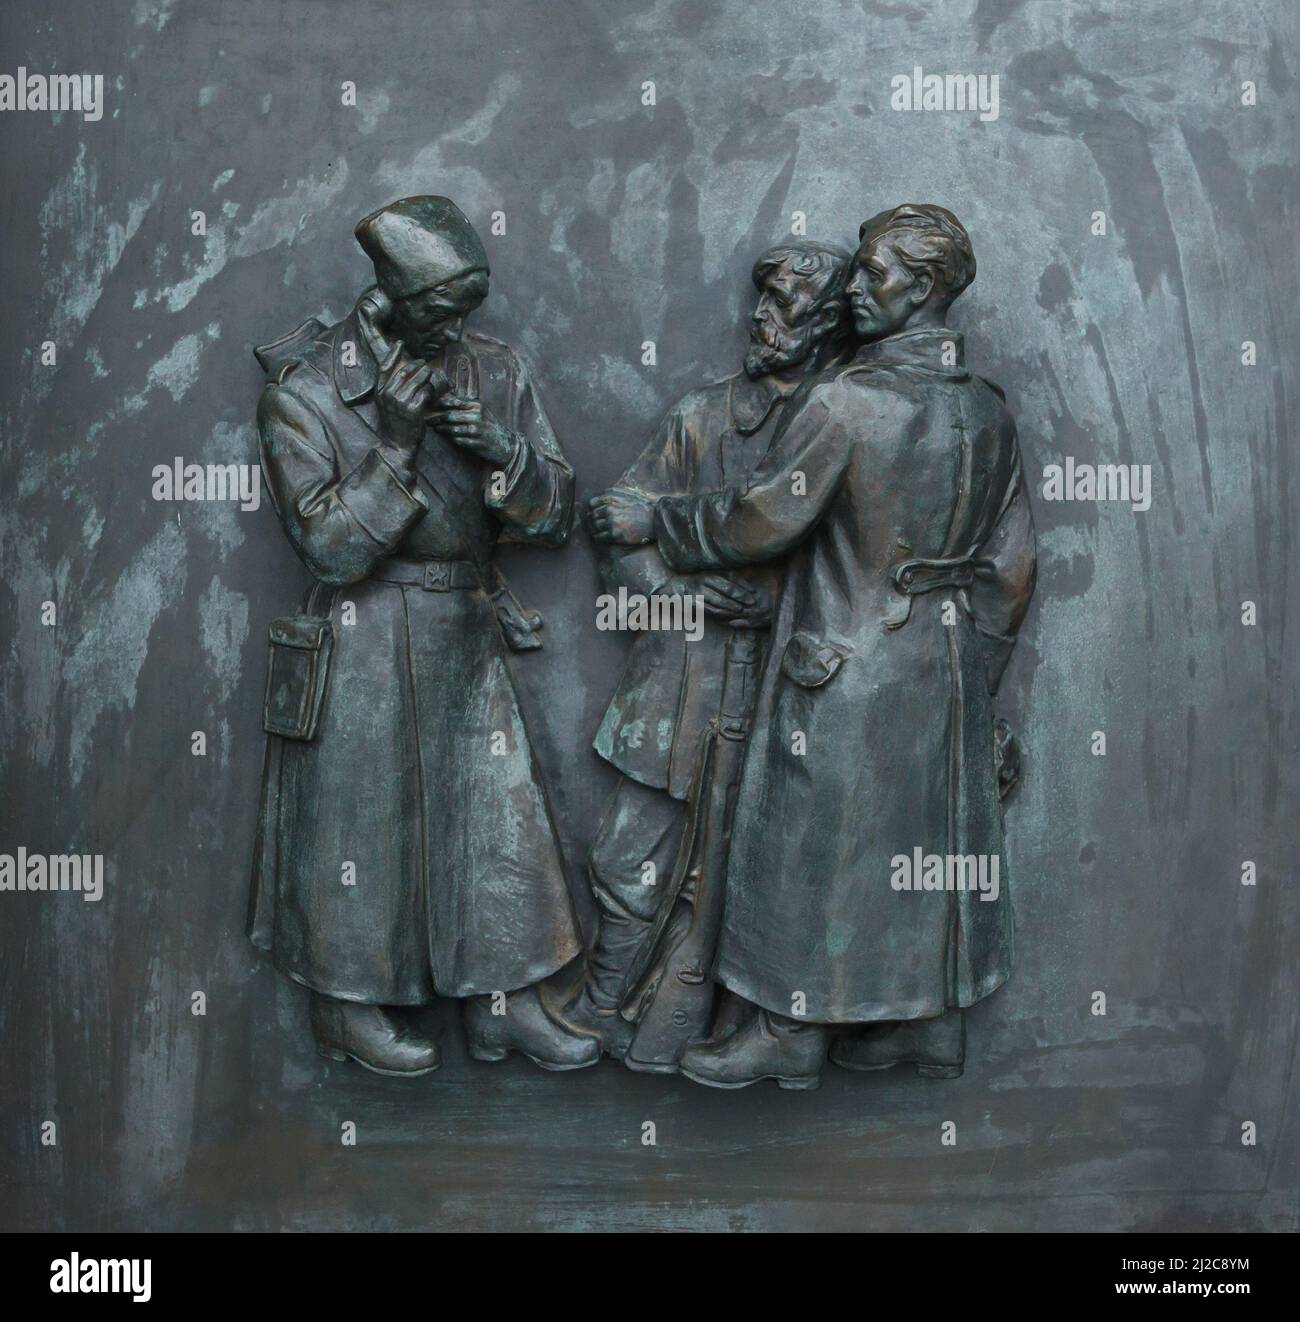 Slovak partisans during World War II depicted in the bronze relief by Slovak sculptor Rudolf Pribiš placed on the main door to the Slavín Memorial in Bratislava, Slovakia. The war memorial devoted to Red Army soldiers fallen during World War II was designed by Slovak architect Ján Svetlík and build between 1957 and 1960. Stock Photo